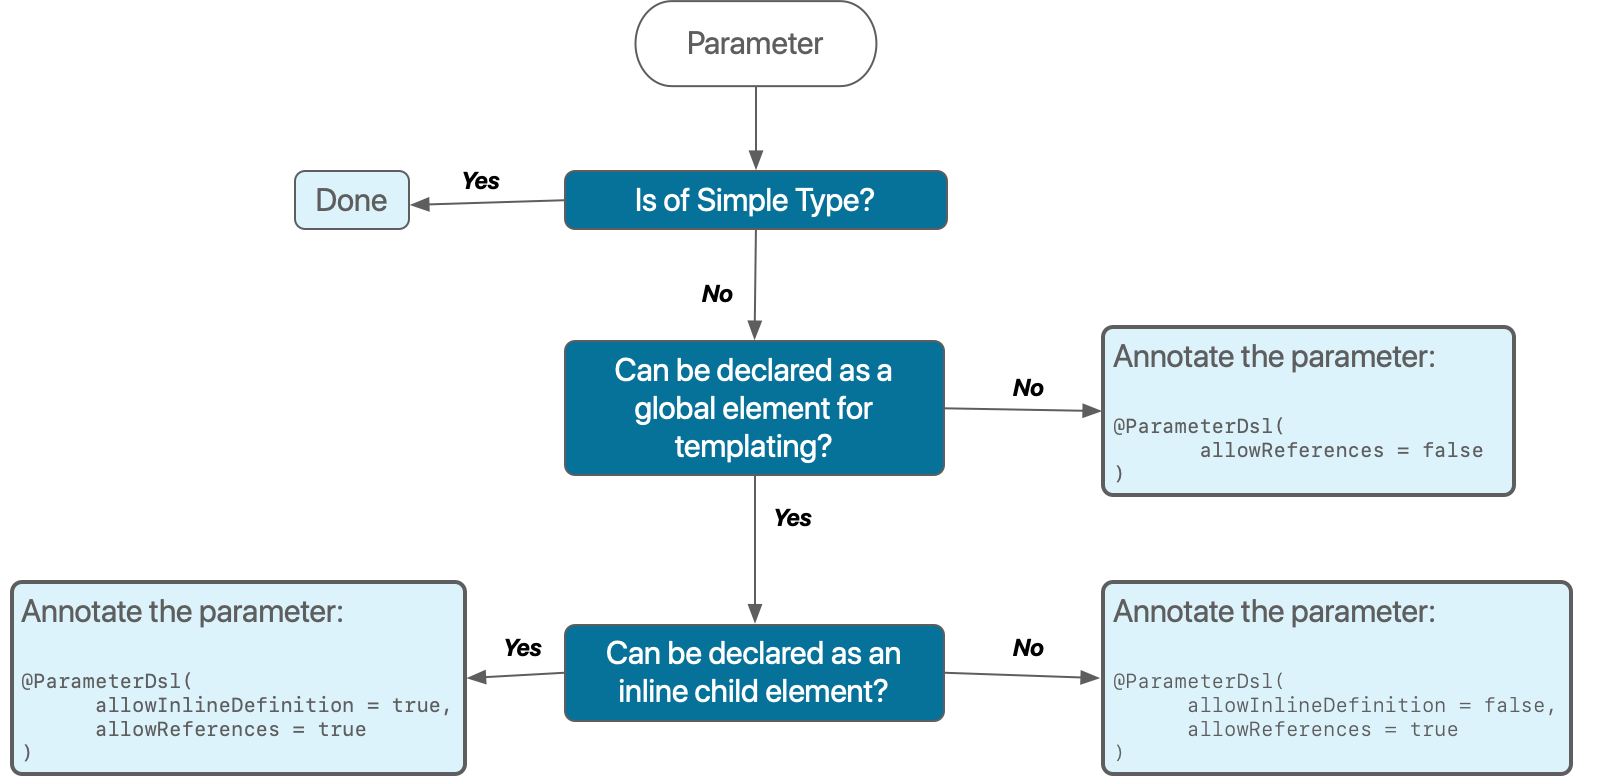 Decision tree for POJOs and parameter groups